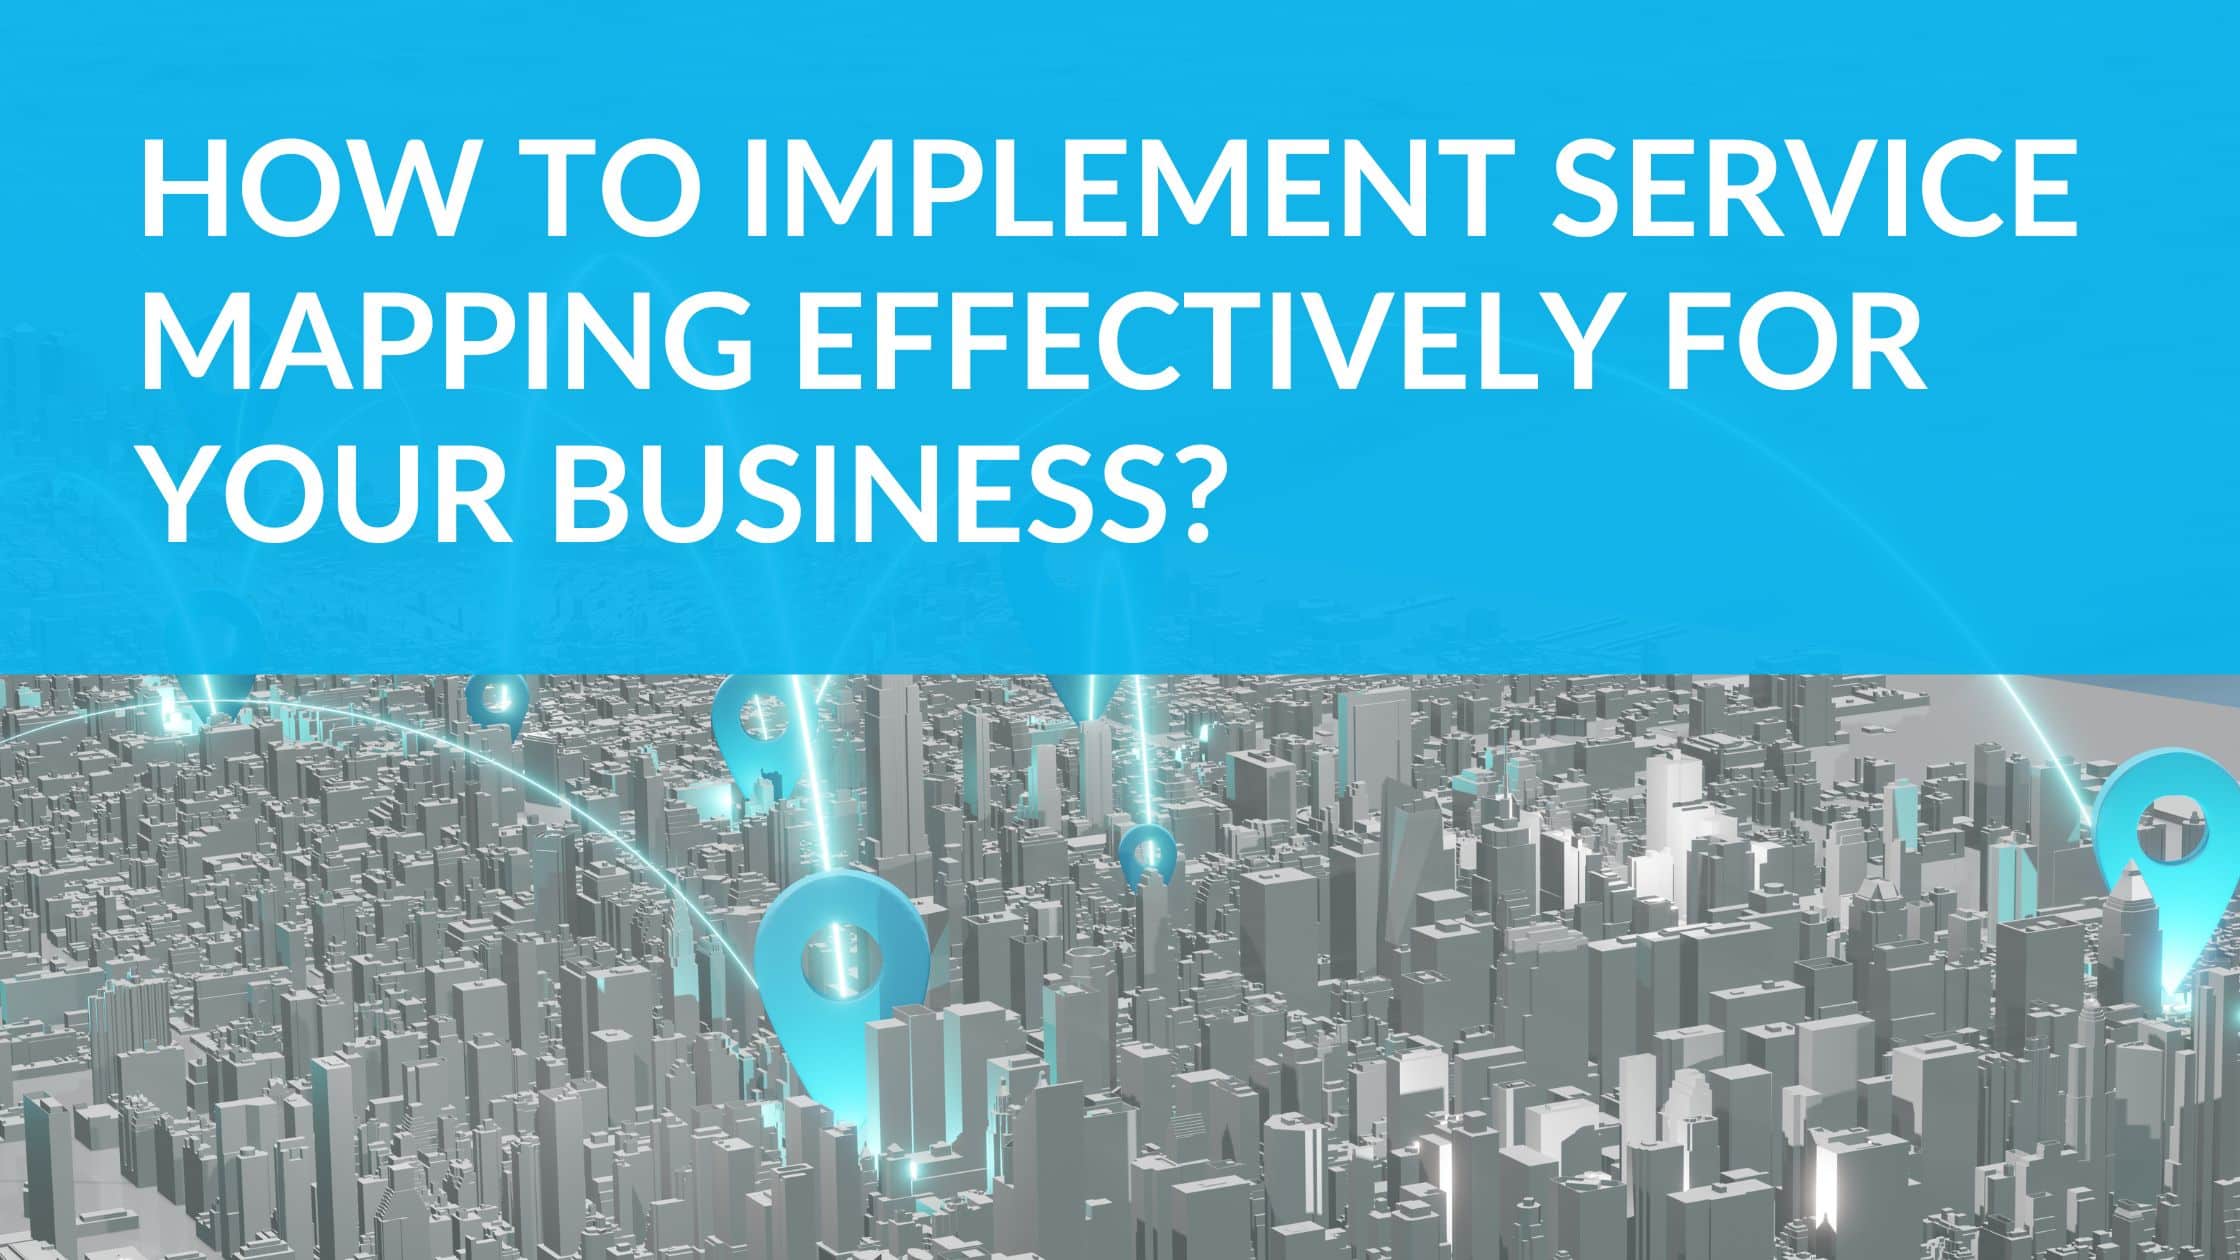 How to implement service mapping effectively for your business?